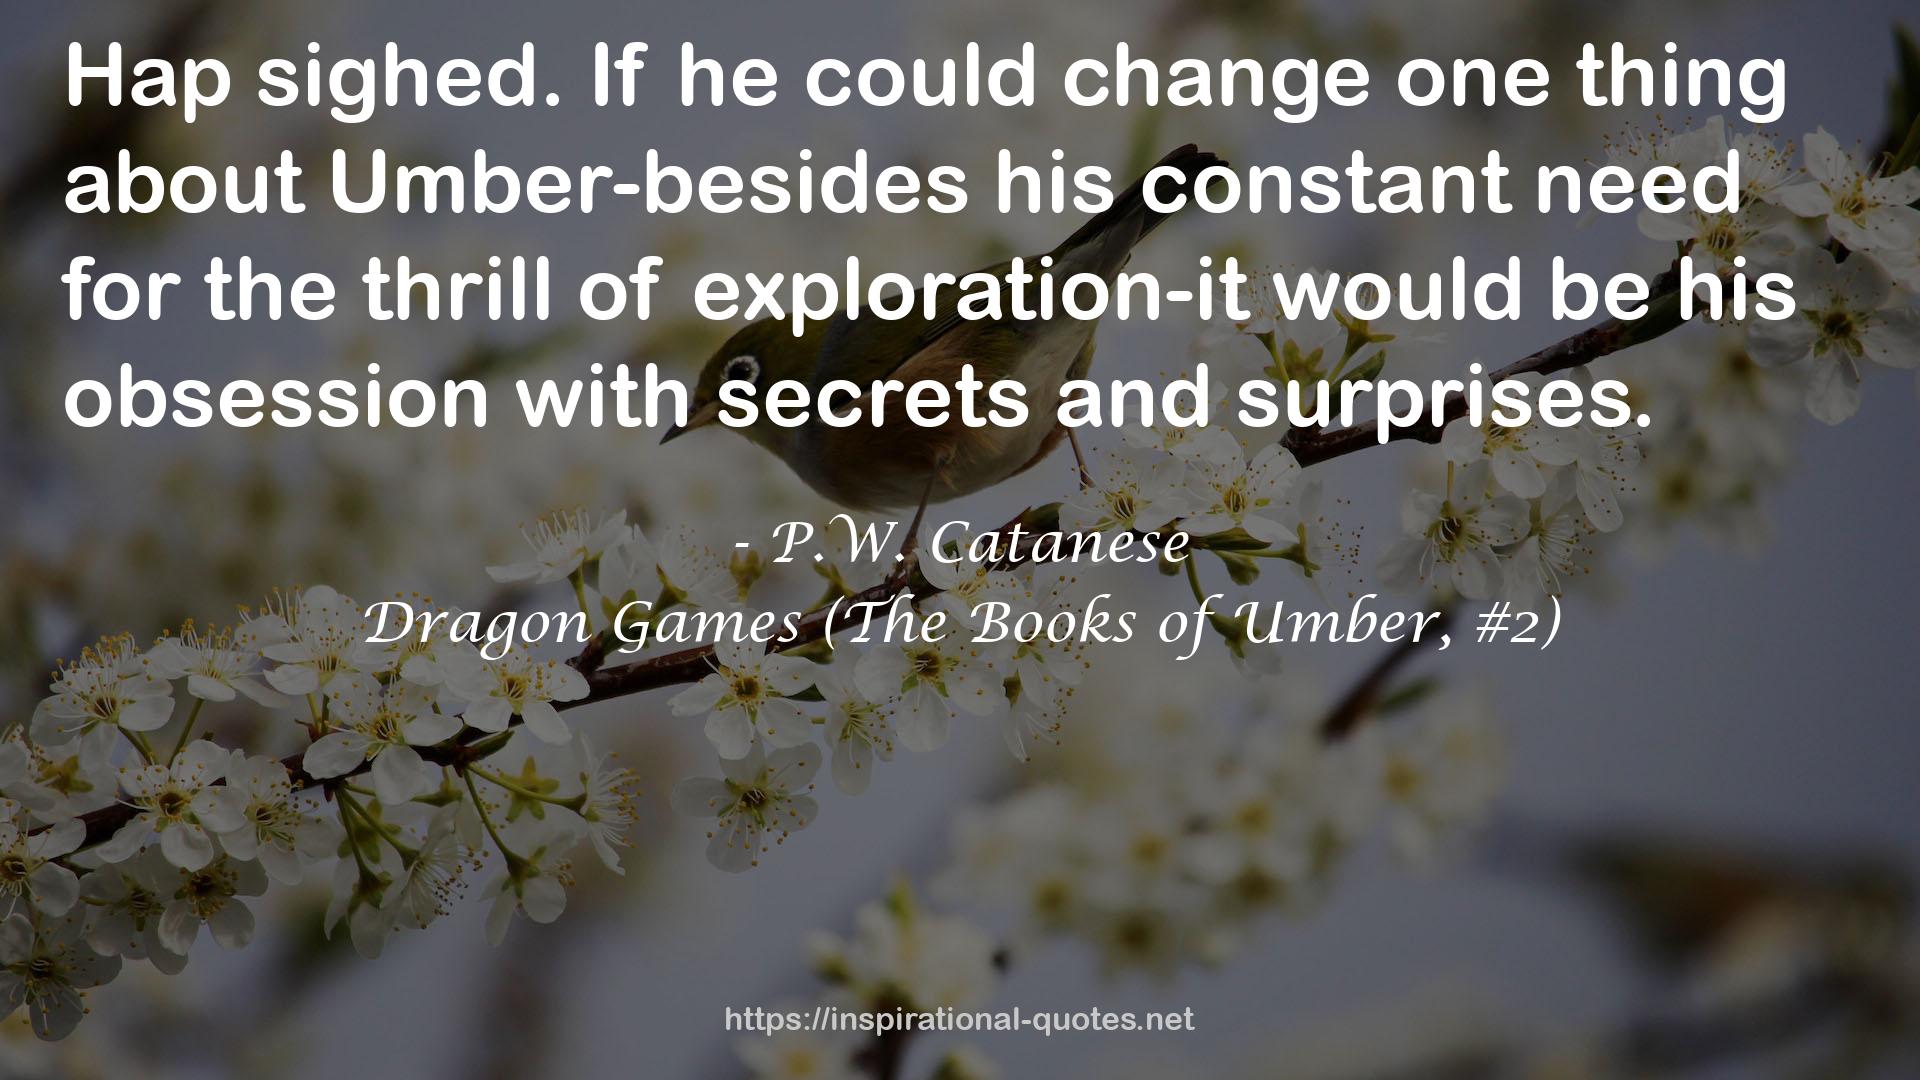 Dragon Games (The Books of Umber, #2) QUOTES